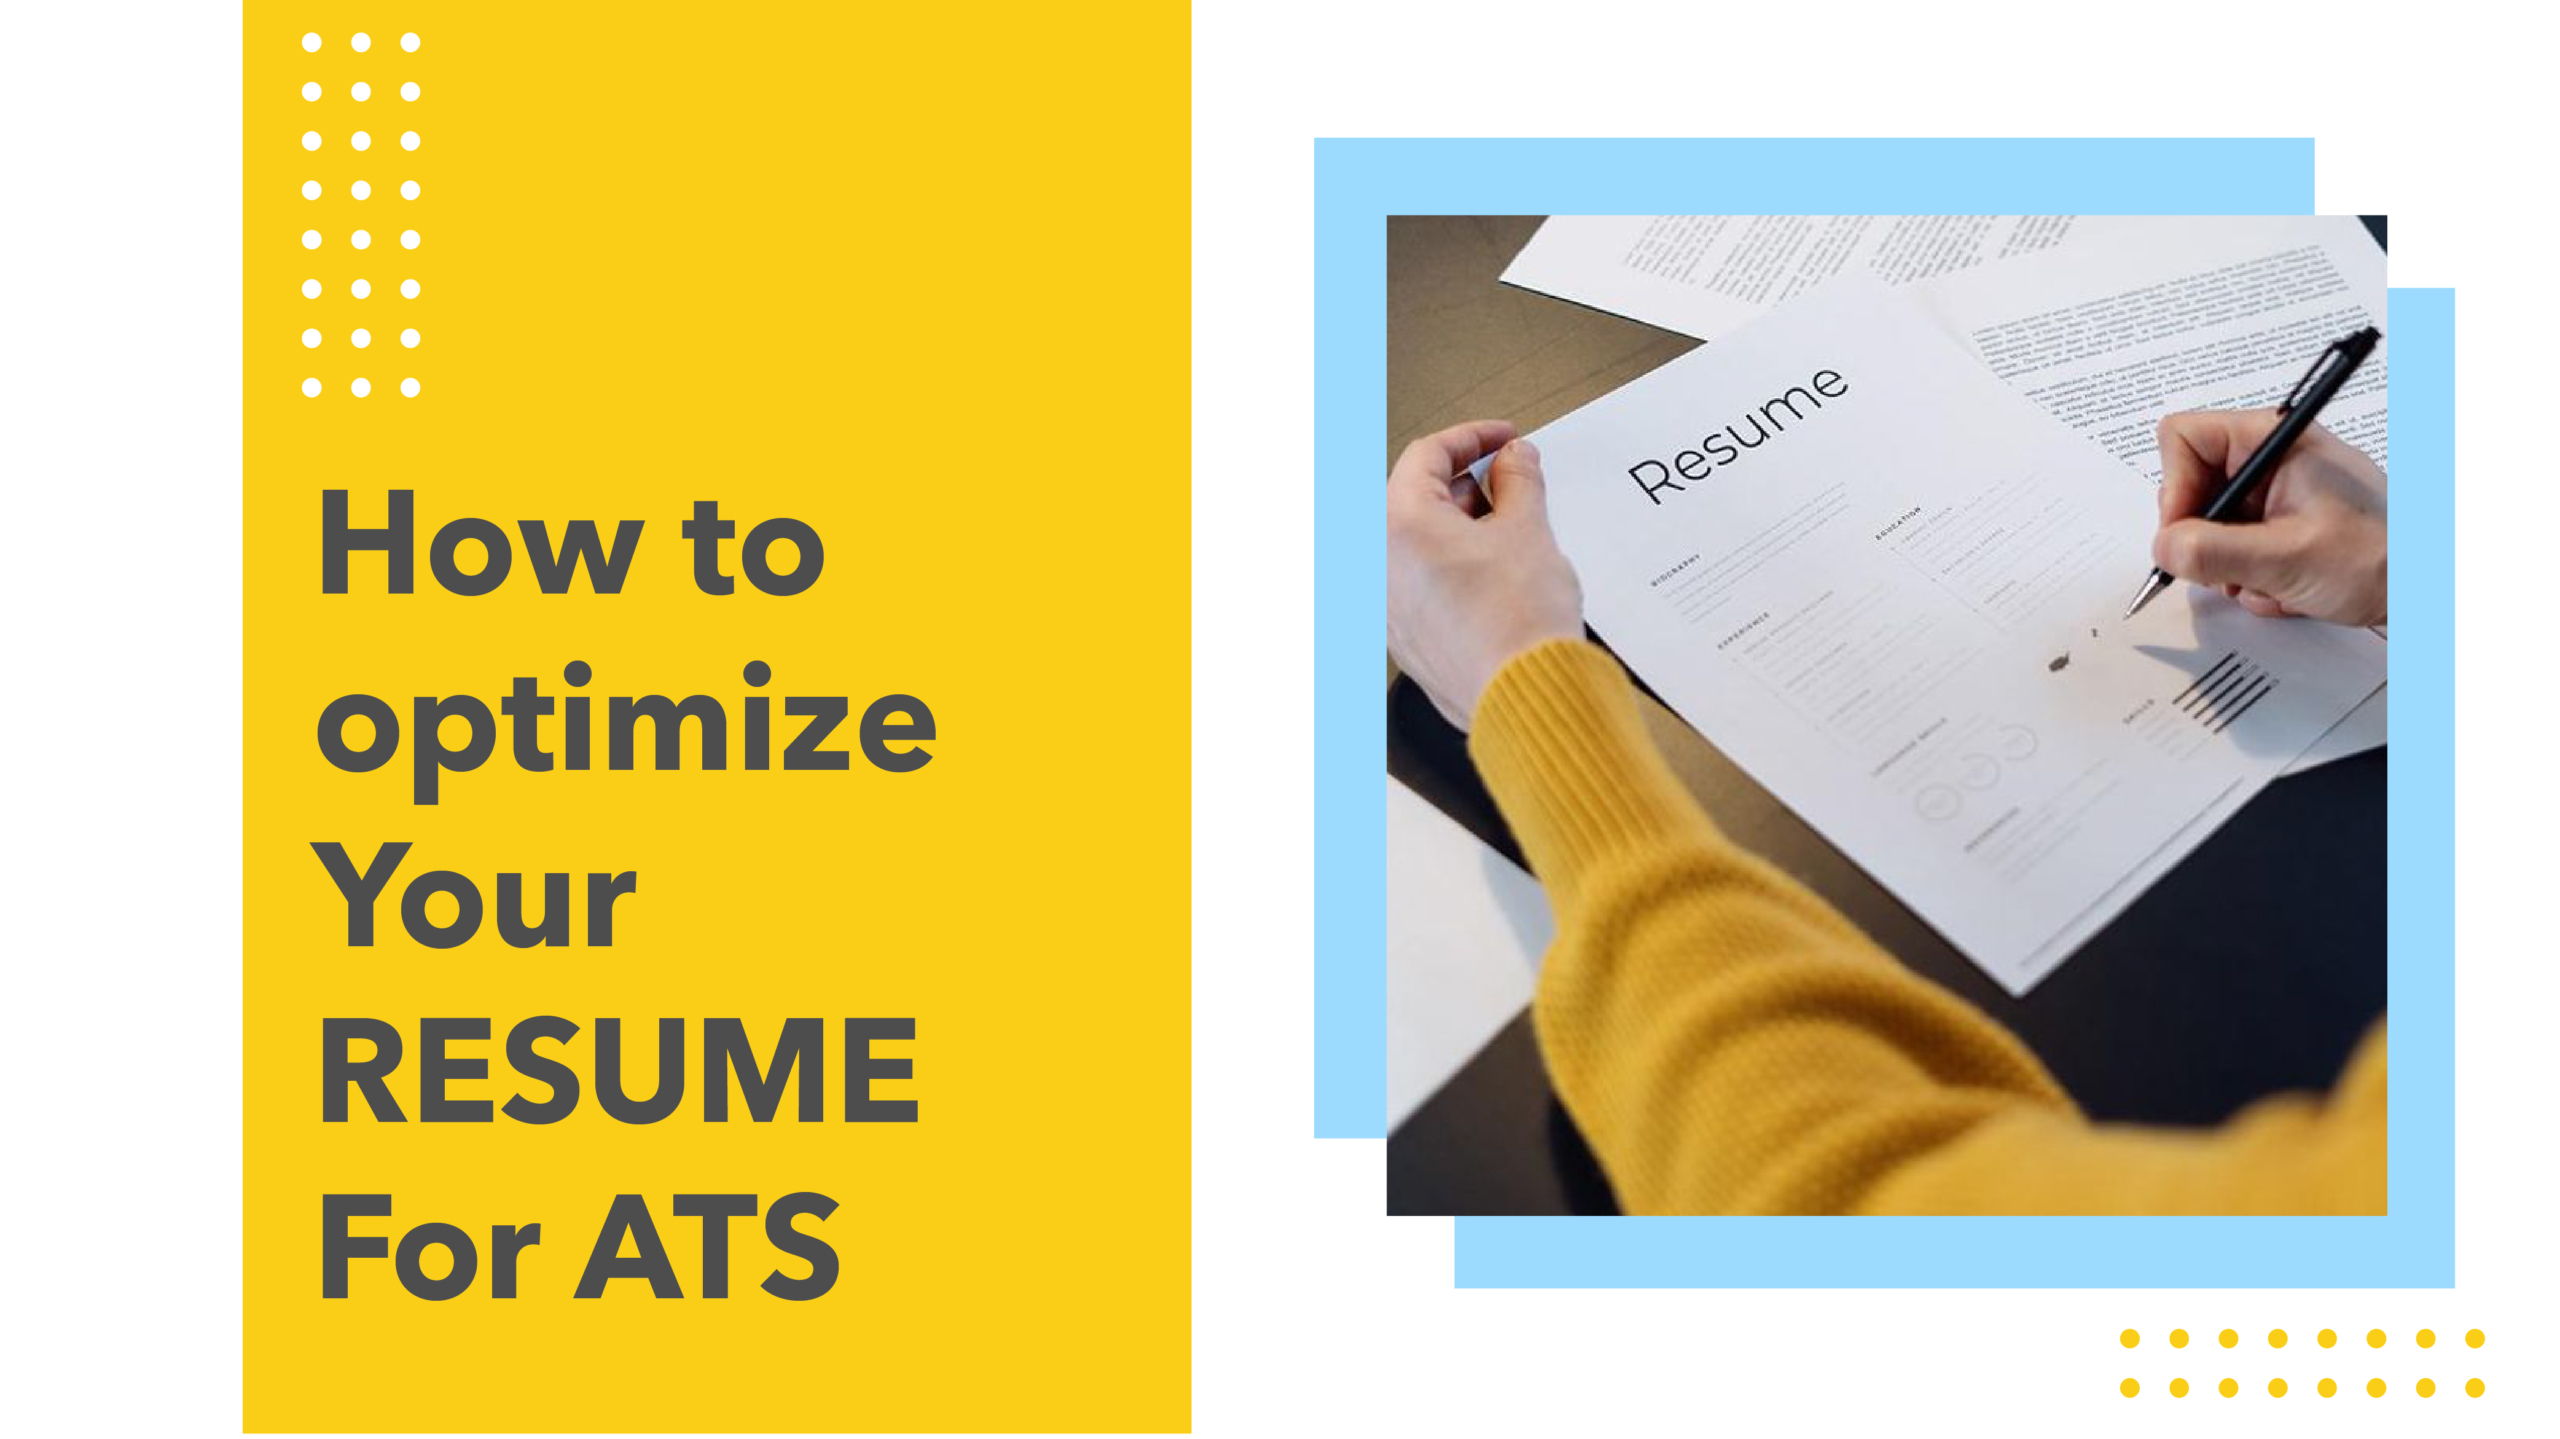 How to Optimize Your Resume for ATS